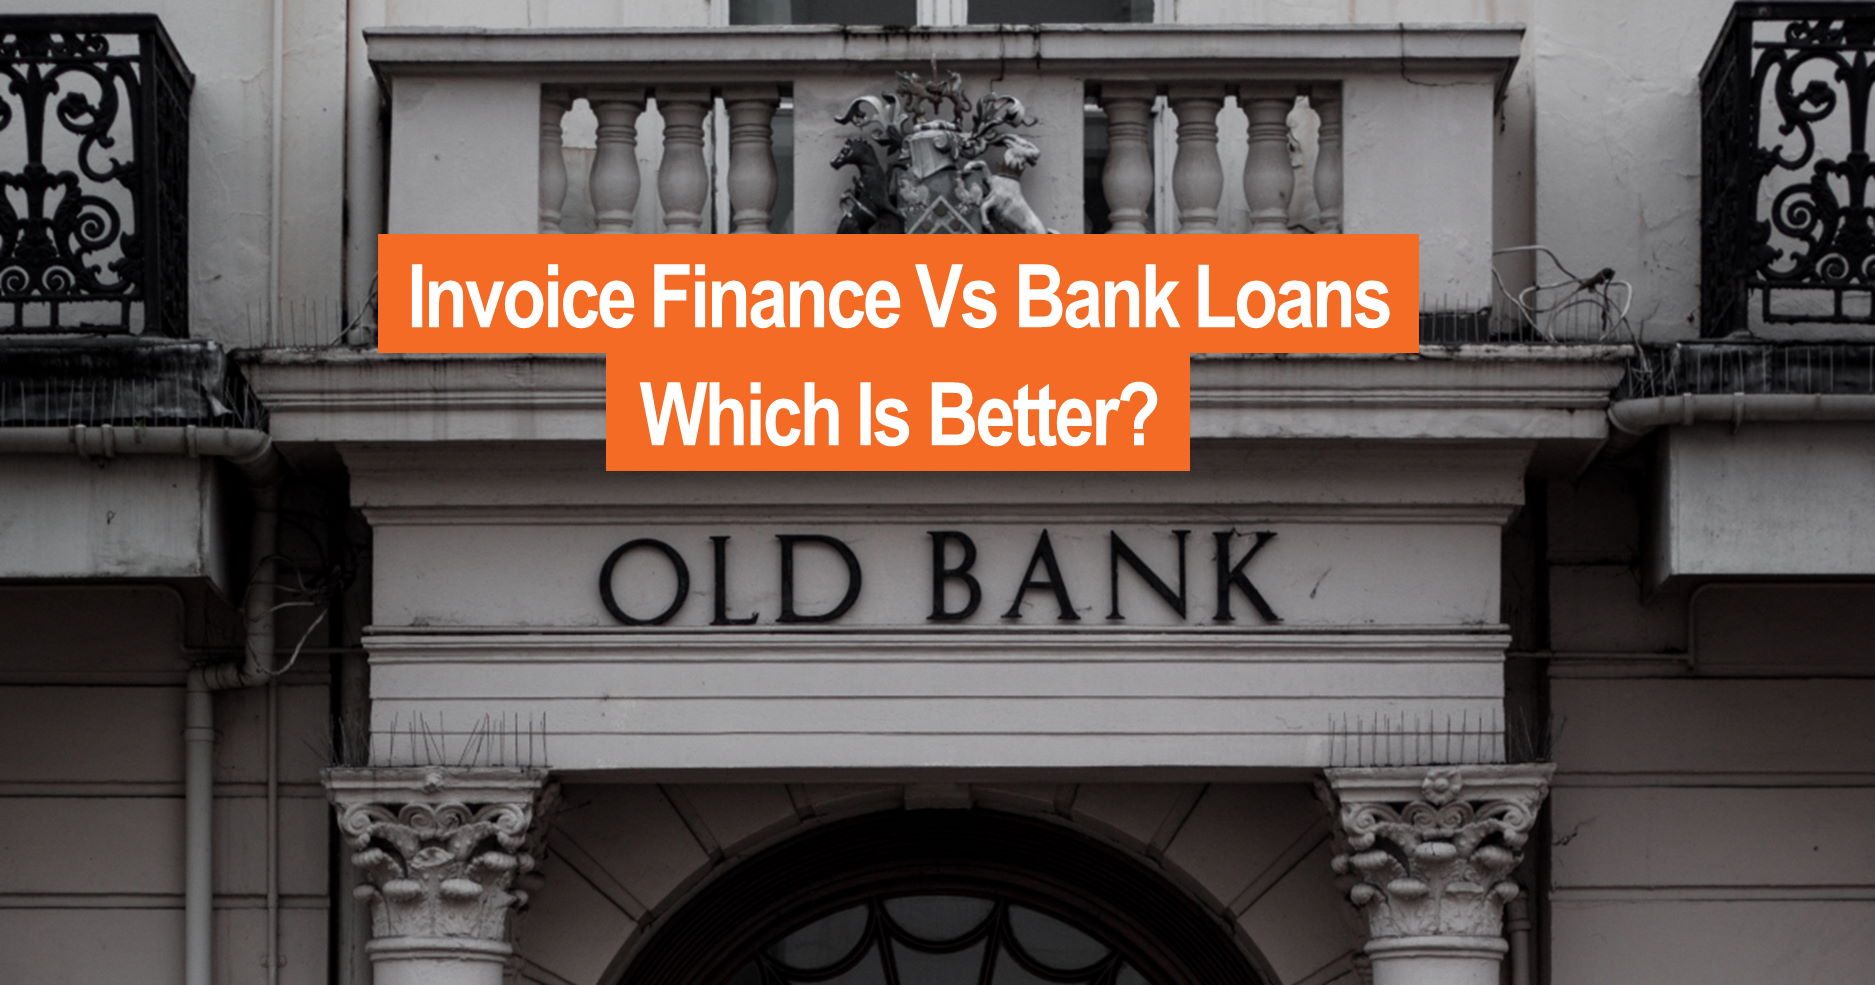 Which is best invoice finance or bank loans picture of old bank